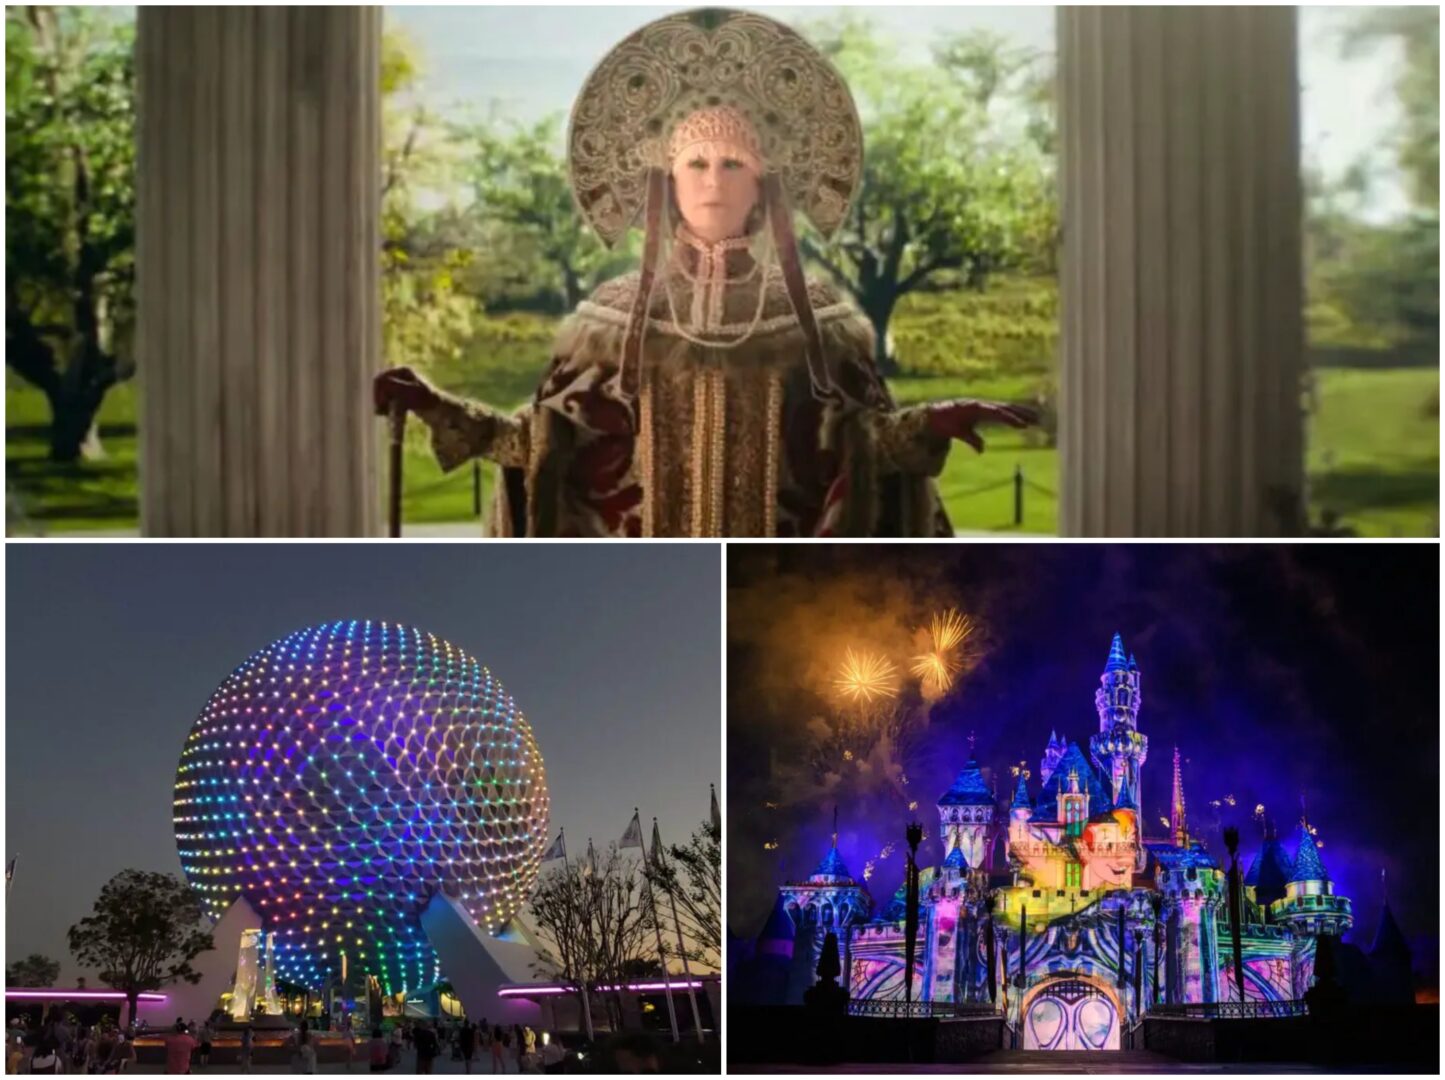 Disney News Highlights: More After Hours Nights Announced, Haunted Mansion Trailer, New Full Menu Released for Cafe Daisy